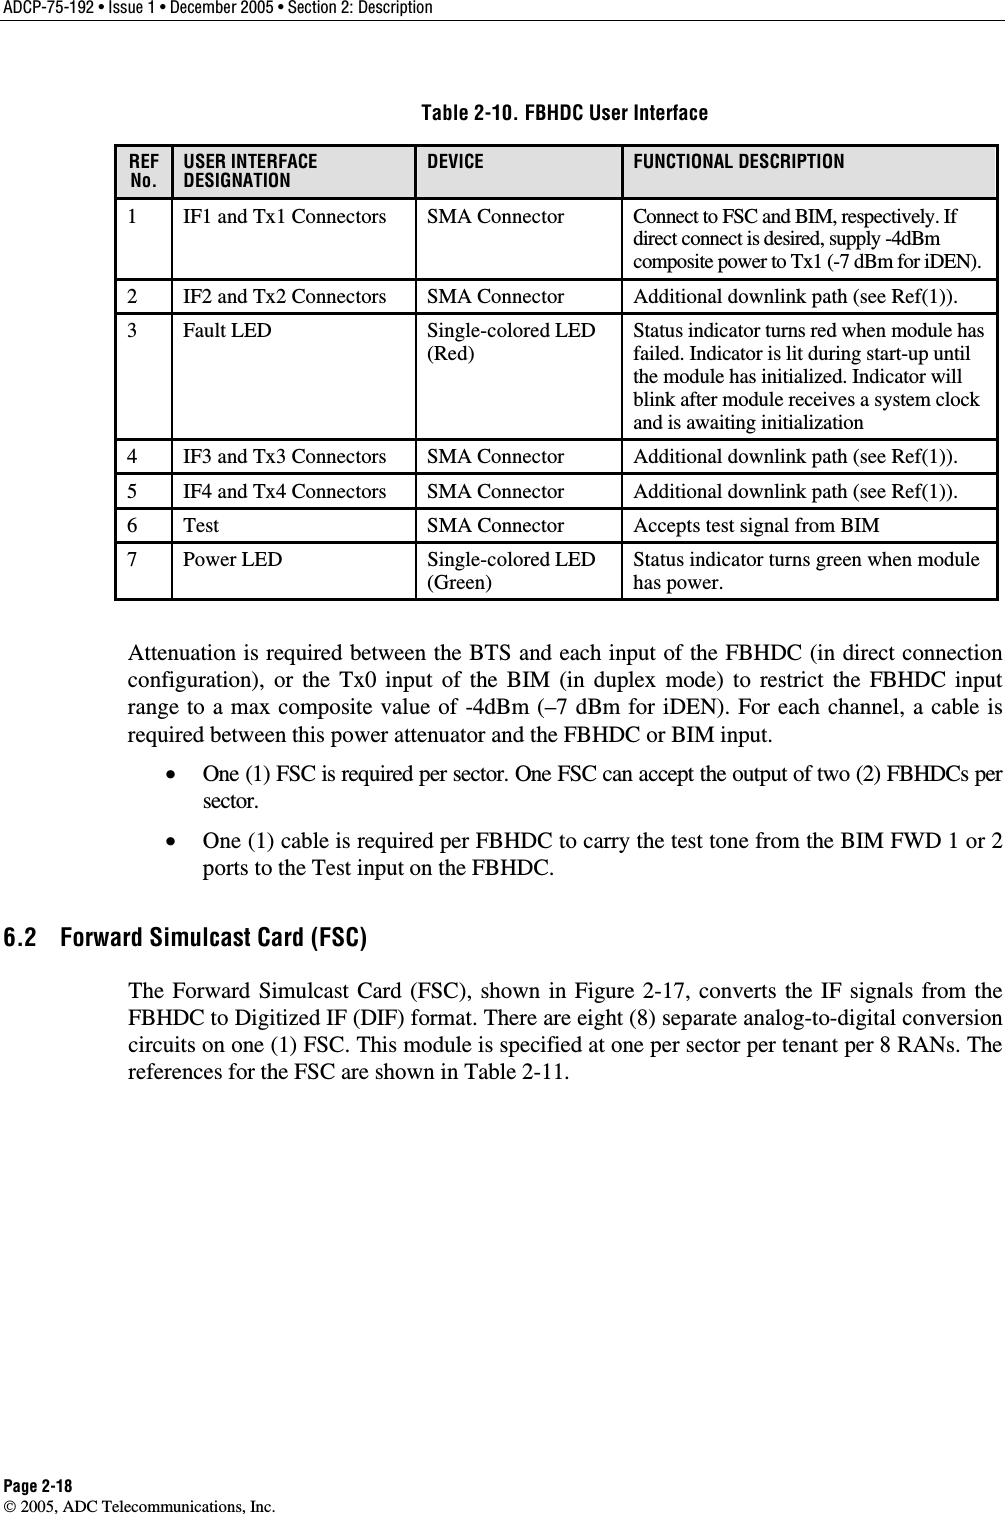 ADCP-75-192 • Issue 1 • December 2005 • Section 2: Description Page 2-18  2005, ADC Telecommunications, Inc. Table 2-10. FBHDC User Interface REFNo. USER INTERFACE DESIGNATION DEVICE  FUNCTIONAL DESCRIPTION 1  IF1 and Tx1 Connectors  SMA Connector  Connect to FSC and BIM, respectively. If direct connect is desired, supply -4dBm composite power to Tx1 (-7 dBm for iDEN). 2  IF2 and Tx2 Connectors  SMA Connector  Additional downlink path (see Ref(1)). 3 Fault LED  Single-colored LED (Red) Status indicator turns red when module has failed. Indicator is lit during start-up until the module has initialized. Indicator will blink after module receives a system clock and is awaiting initialization 4  IF3 and Tx3 Connectors  SMA Connector  Additional downlink path (see Ref(1)). 5  IF4 and Tx4 Connectors  SMA Connector  Additional downlink path (see Ref(1)). 6  Test  SMA Connector  Accepts test signal from BIM 7 Power LED  Single-colored LED (Green)  Status indicator turns green when module has power. Attenuation is required between the BTS and each input of the FBHDC (in direct connection configuration), or the Tx0 input of the BIM (in duplex mode) to restrict the FBHDC input range to a max composite value of -4dBm (–7 dBm for iDEN). For each channel, a cable is required between this power attenuator and the FBHDC or BIM input. •  One (1) FSC is required per sector. One FSC can accept the output of two (2) FBHDCs per sector. •  One (1) cable is required per FBHDC to carry the test tone from the BIM FWD 1 or 2 ports to the Test input on the FBHDC. 6.2  Forward Simulcast Card (FSC) The Forward Simulcast Card (FSC), shown in Figure 2-17, converts the IF signals from the FBHDC to Digitized IF (DIF) format. There are eight (8) separate analog-to-digital conversion circuits on one (1) FSC. This module is specified at one per sector per tenant per 8 RANs. The references for the FSC are shown in Table 2-11.  